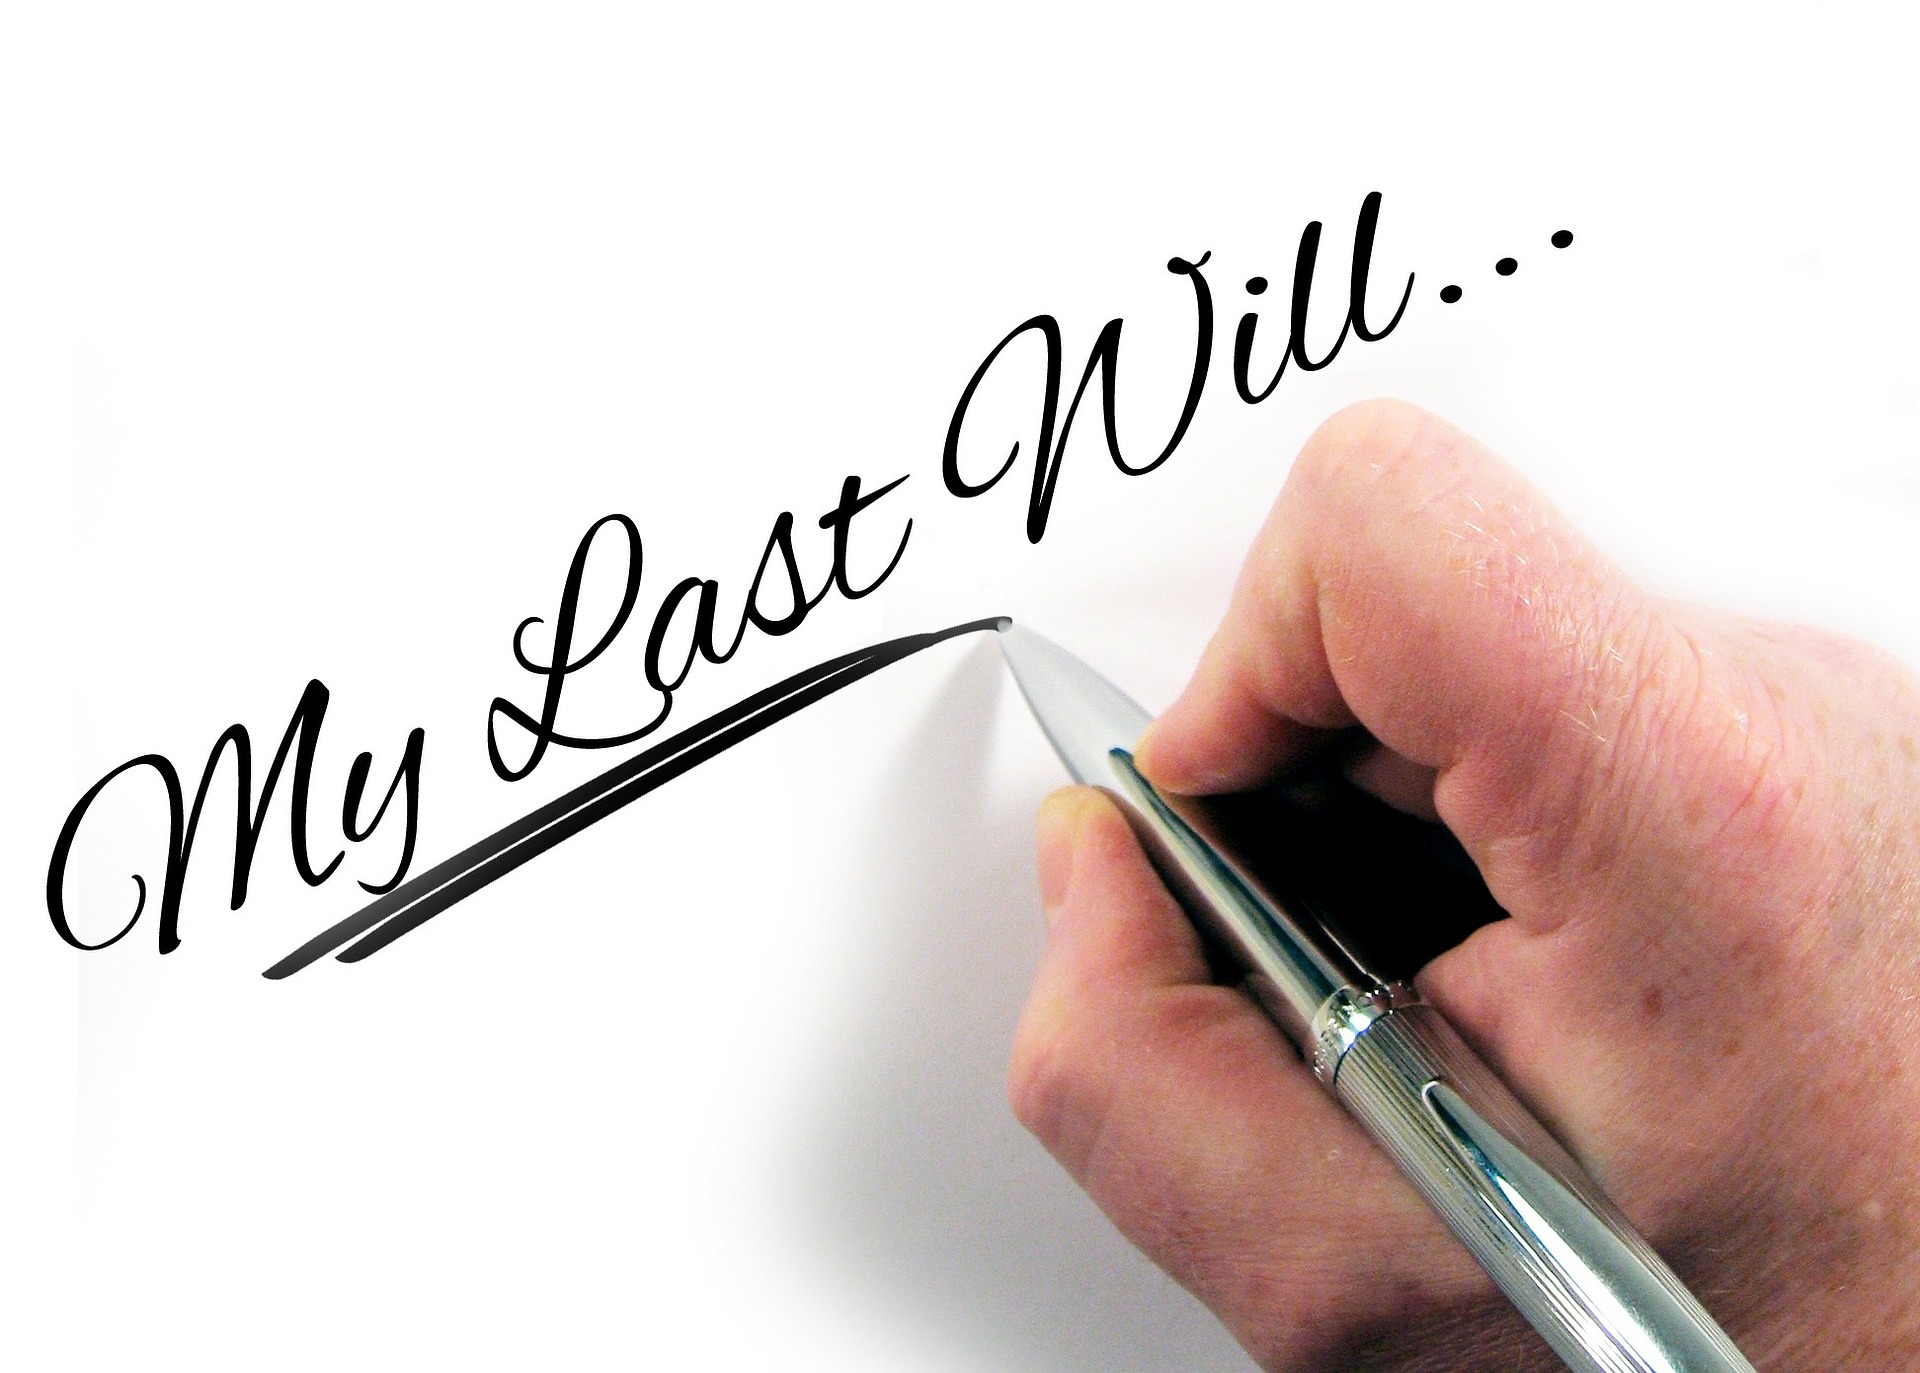 hand with a pen writing my last will